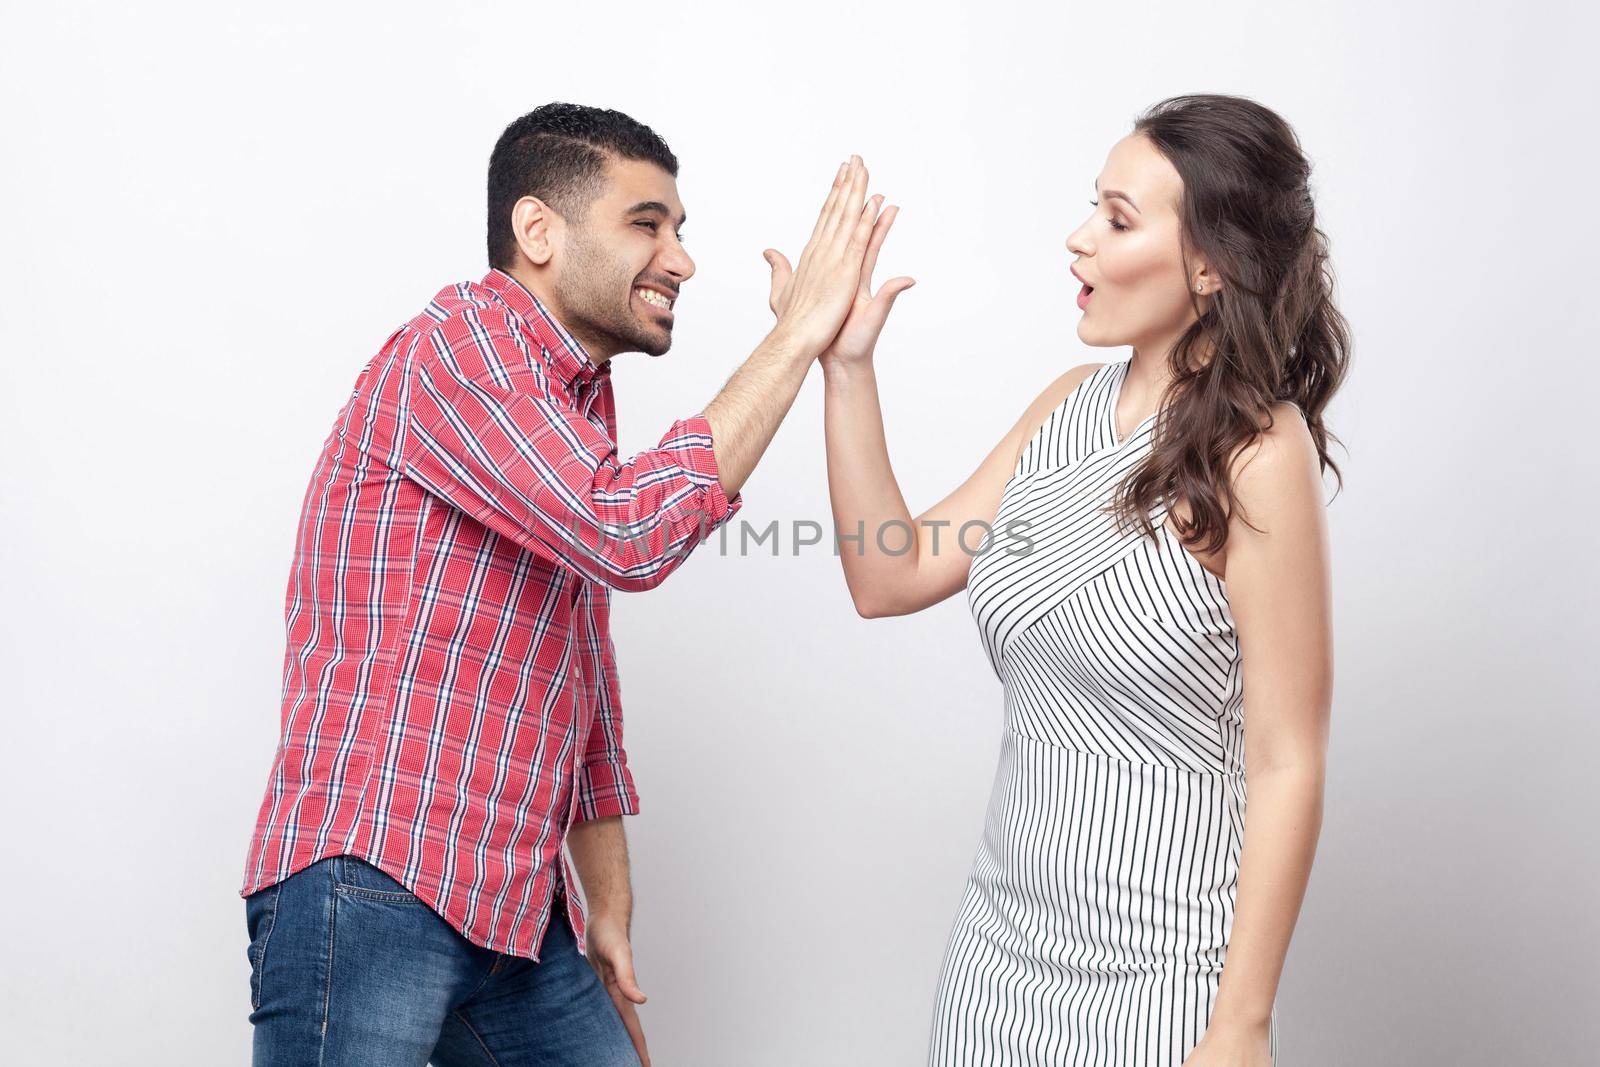 high five. Profile side view portrait of happy handsome man in red checkered shirt and beautiful woman in white striped dress standing and celebraiting victory. indoor studio shot on grey background.